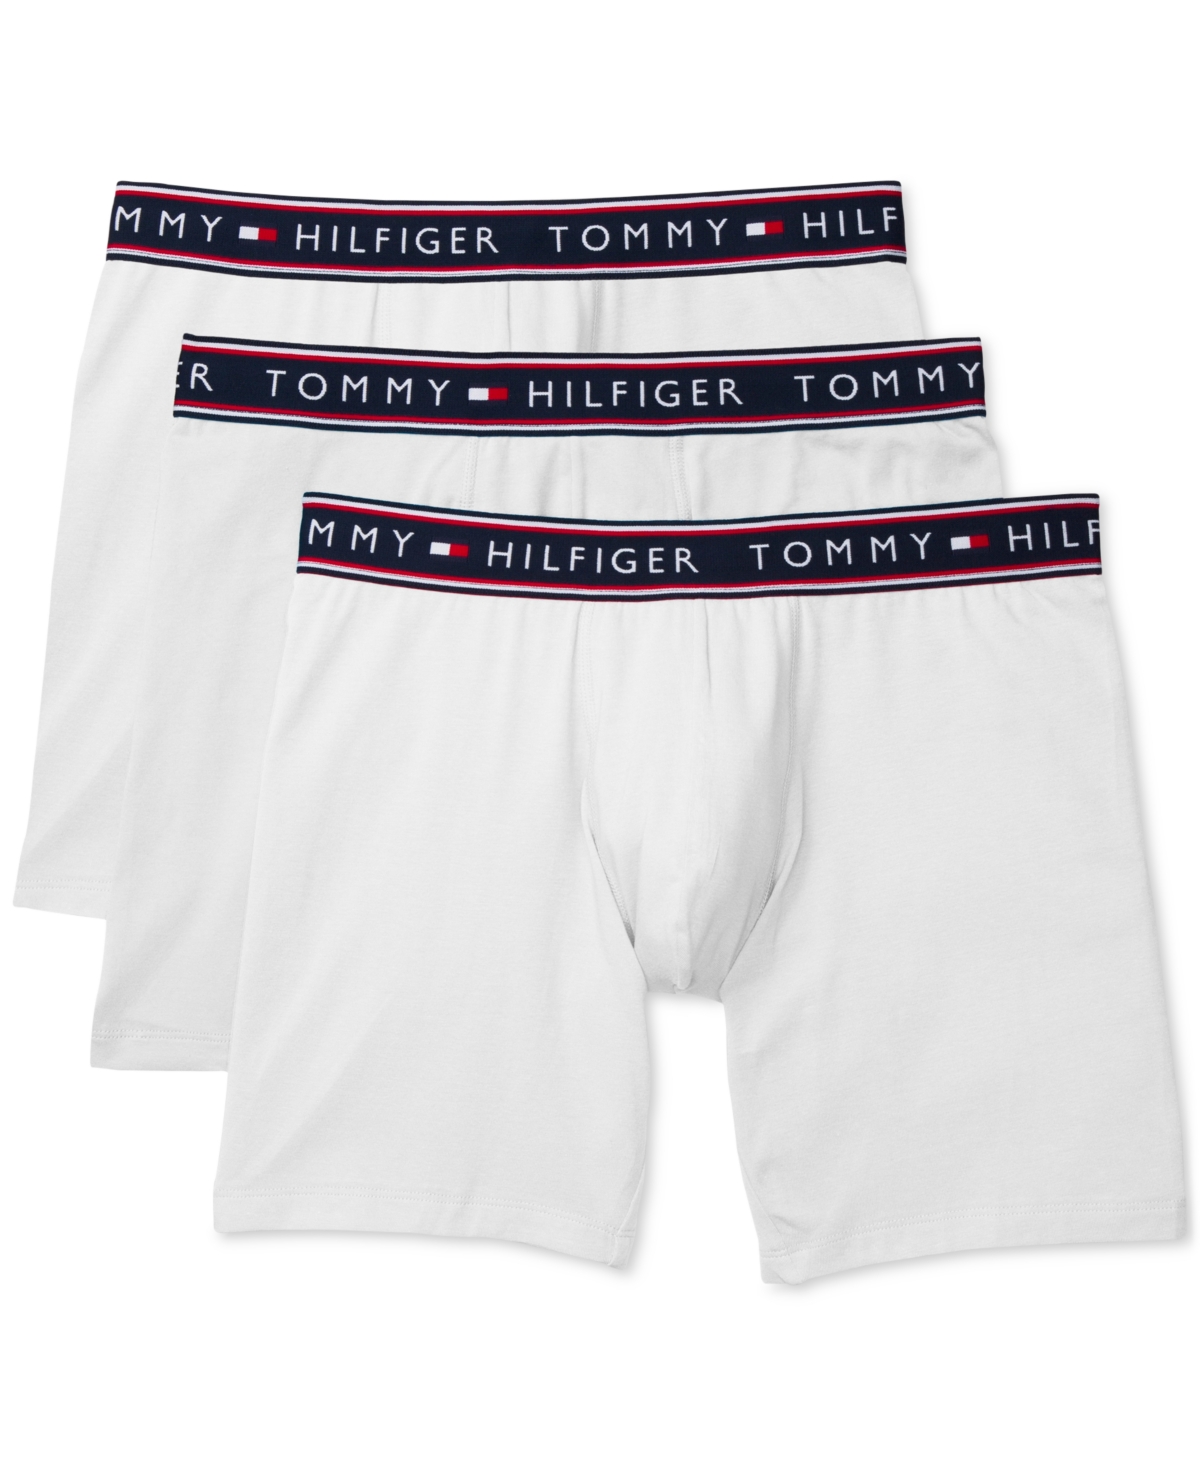 UPC 088541539333 product image for Tommy Hilfiger Men's Cotton Stretch Boxer Brief, 3 Pack | upcitemdb.com